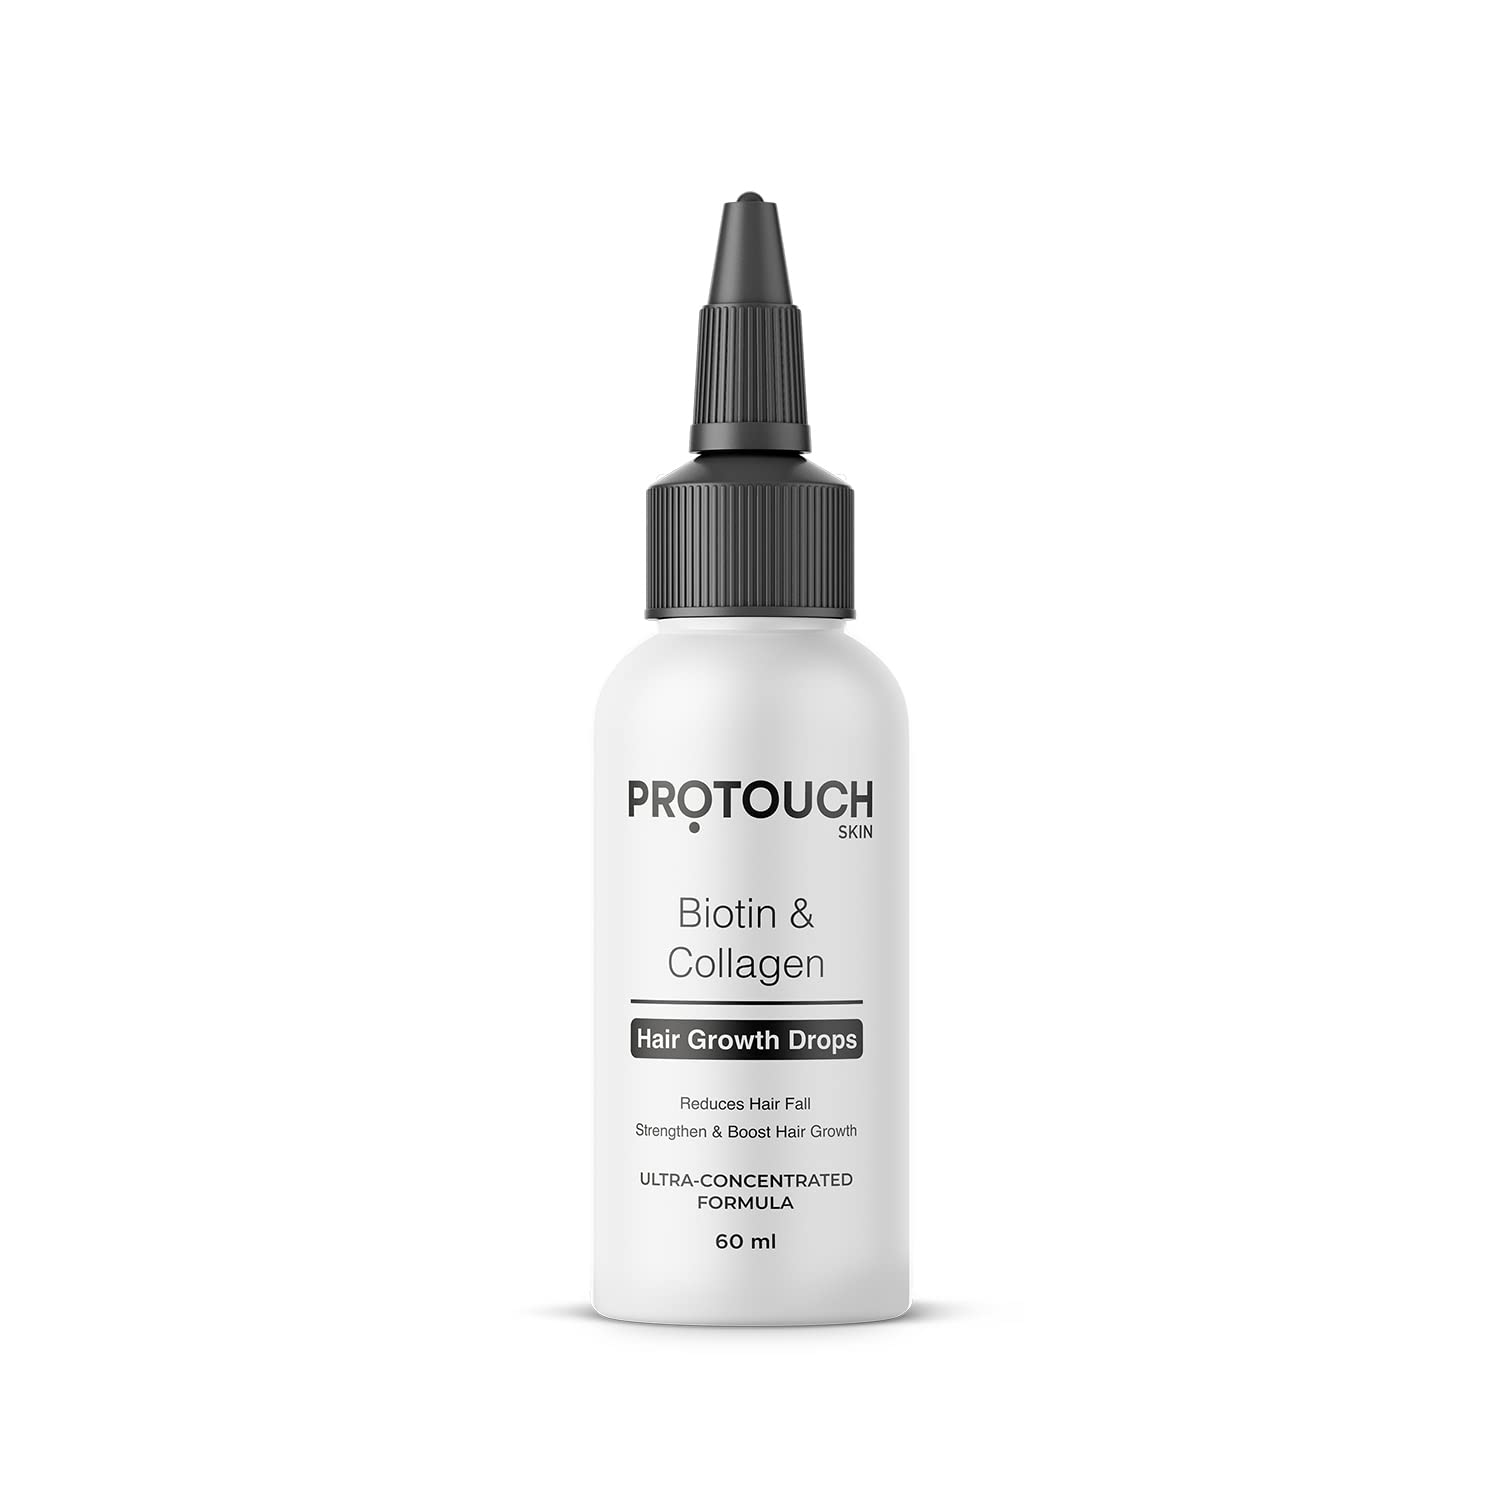 PROTOUCH Biotin & Collagen Hair Growth Drops